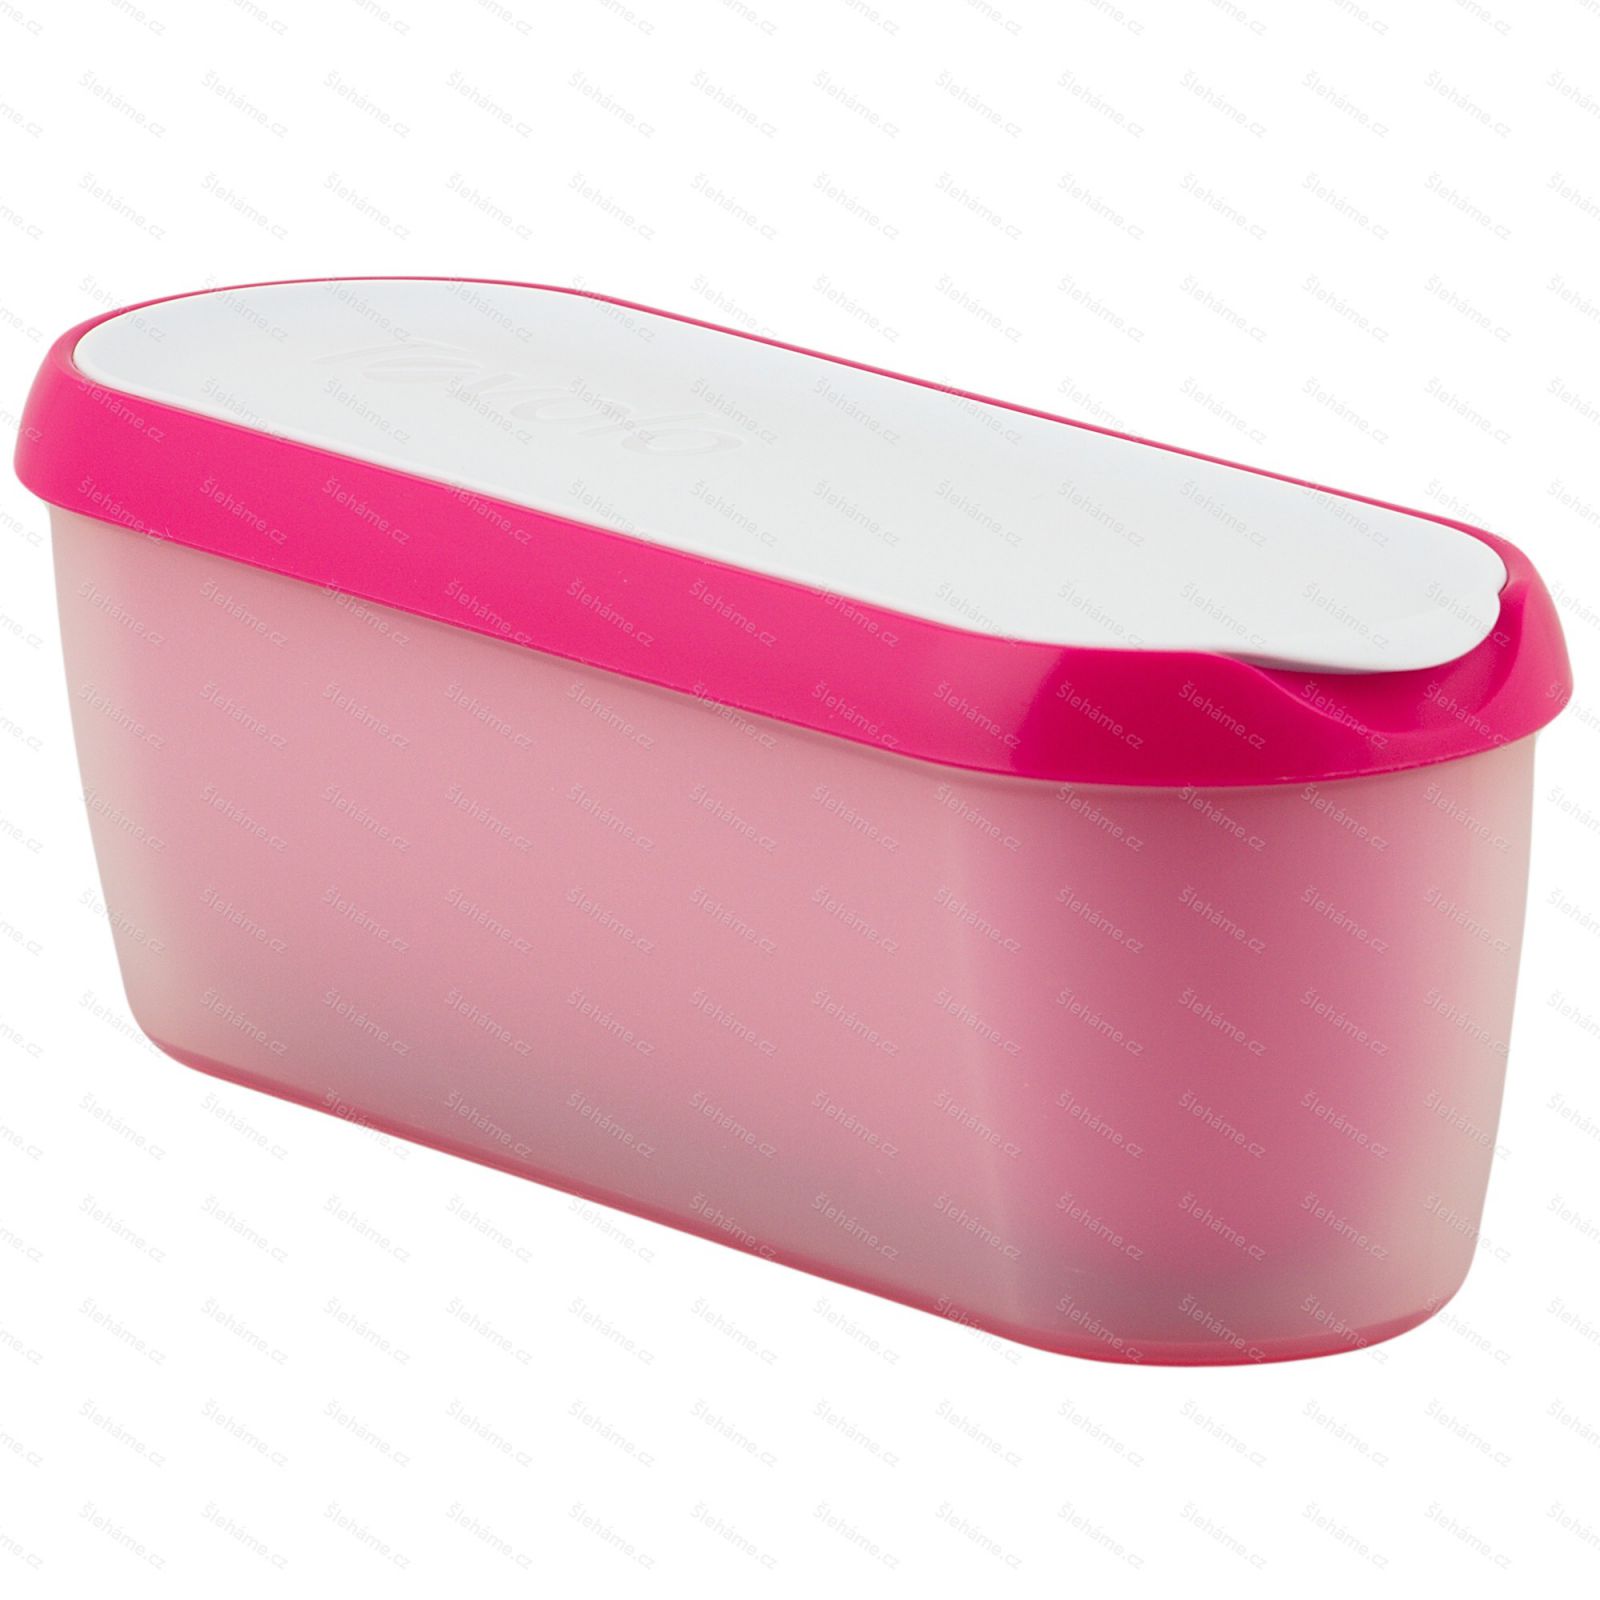 Ice cream tub Tovolo GLIDE-A-SCOOP 1.4 l, raspberry tart - hlavní pohled